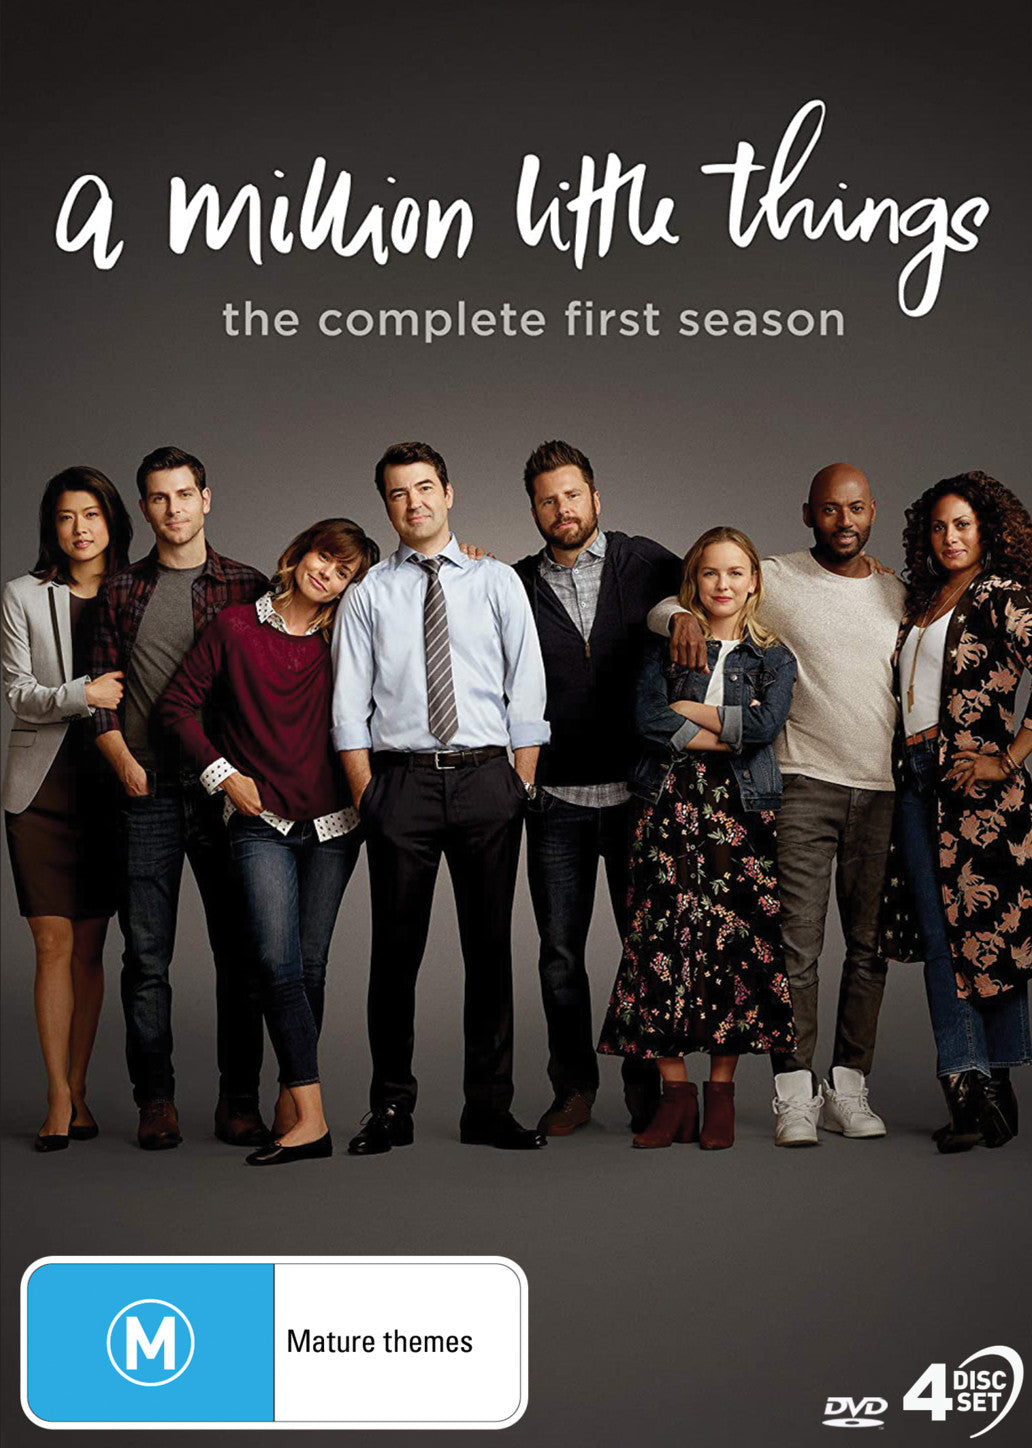 A MILLION LITTLE THINGS: THE COMPLETE FIRST SEASON